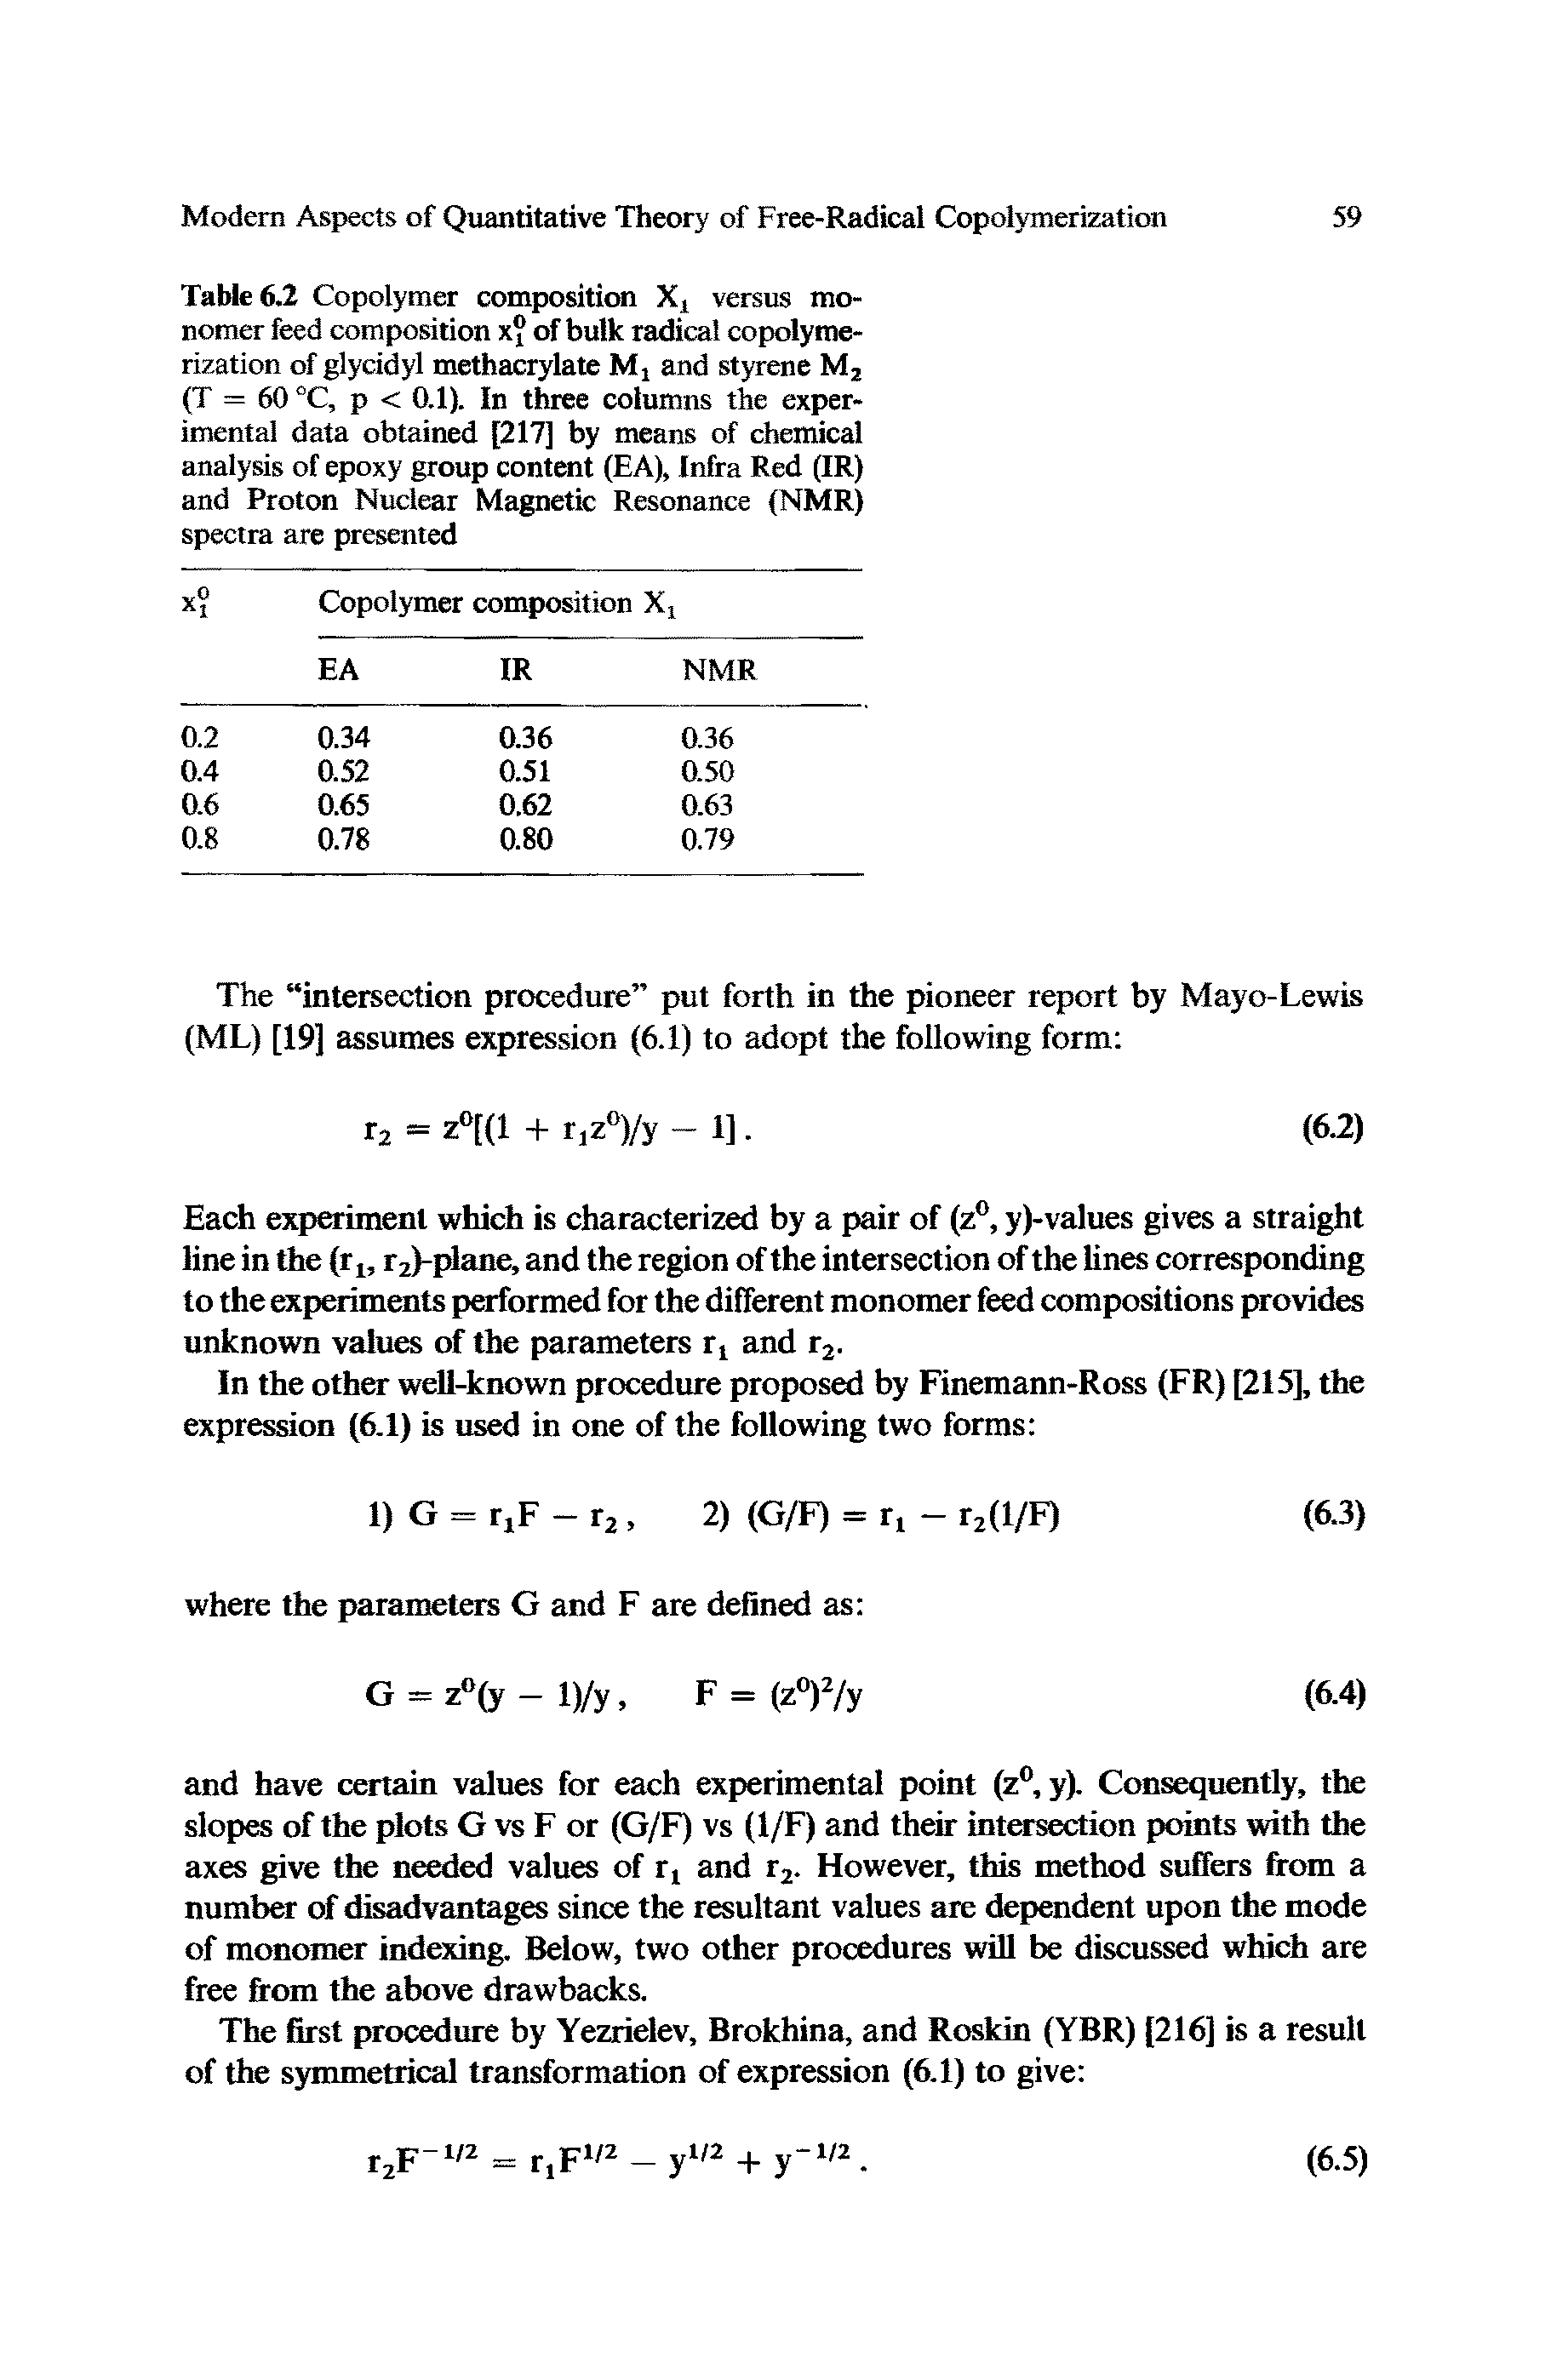 Table 6.2 Copolymer composition Xt versus monomer feed composition x° of bulk radical copolymerization of glycidyl methacrylate M, and styrene M2 (T = 60 °C, p < 0.1). In three columns the experimental data obtained [217] by means of chemical analysis of epoxy group content (EA), Infra Red (IR) and Proton Nuclear Magnetic Resonance (NMR) spectra are presented...